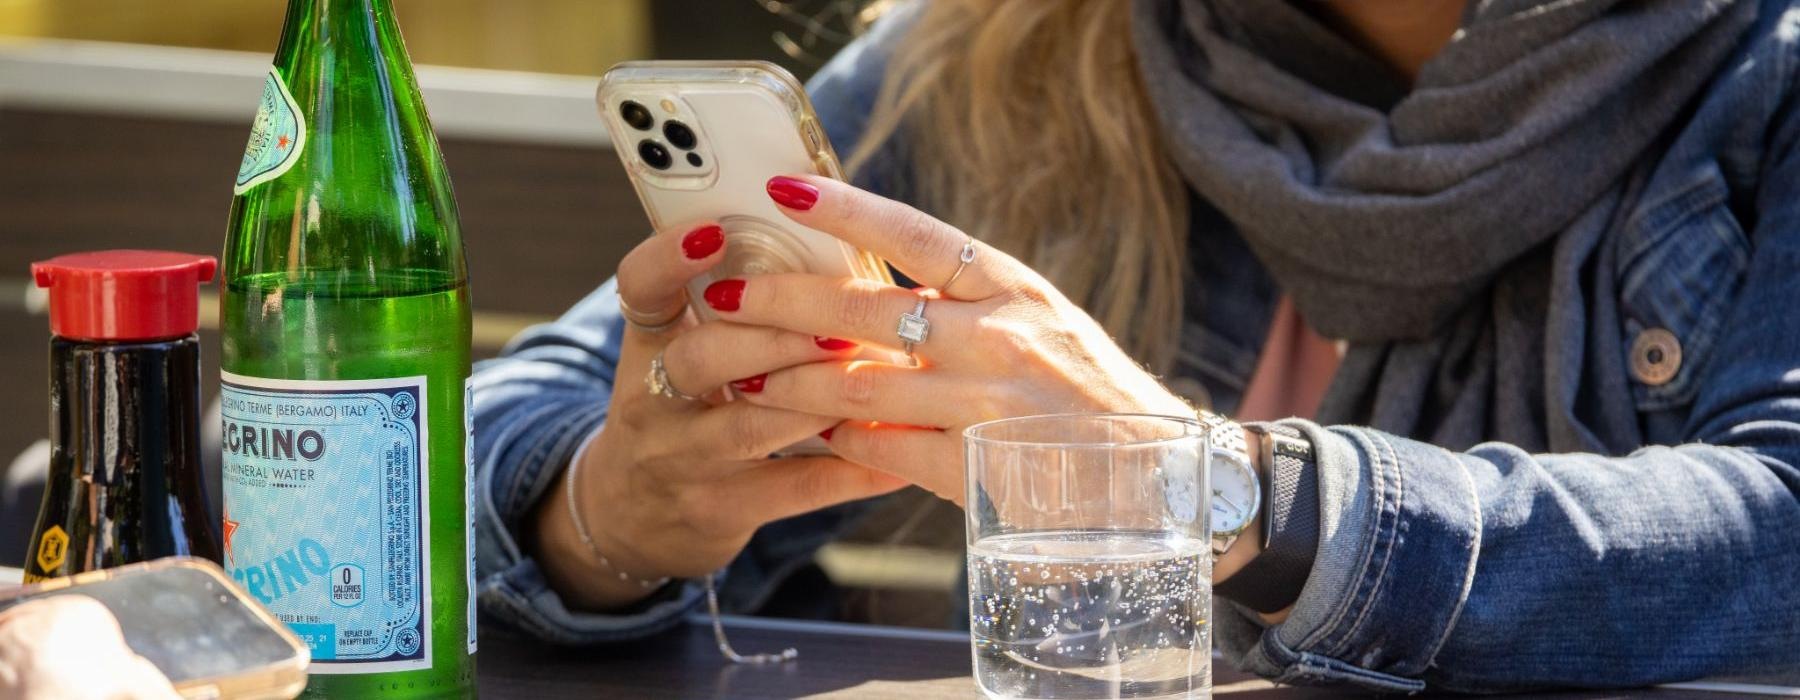 a woman holding a phone with a bottle and a glass on the table she's sitting at